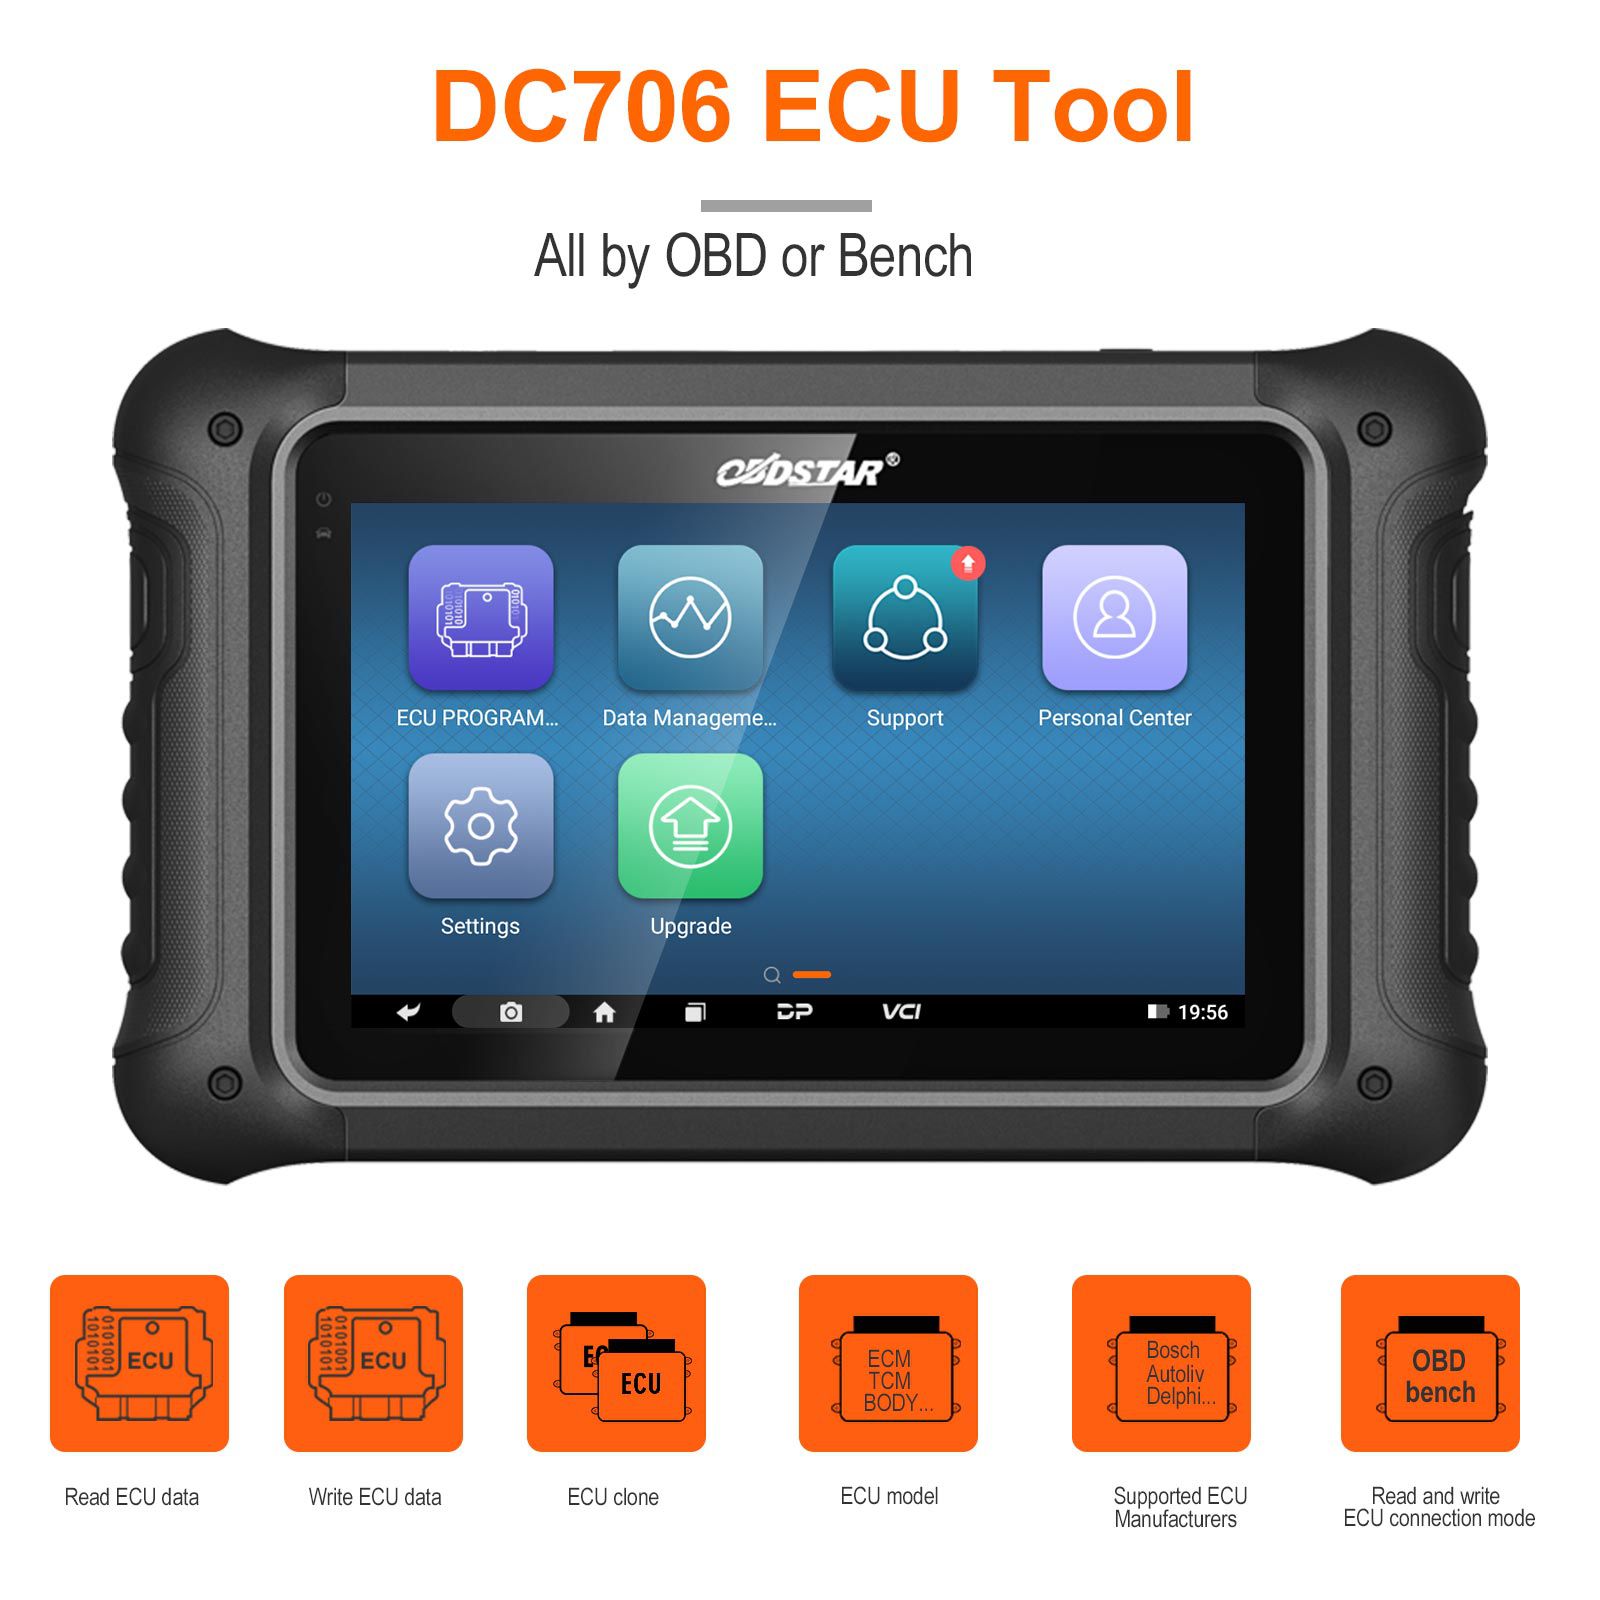 OBDSTAR DC706 ECU Tool  for Car and Motorcycle ECM/ TCM/ BODY Clone by OBD or BENCH